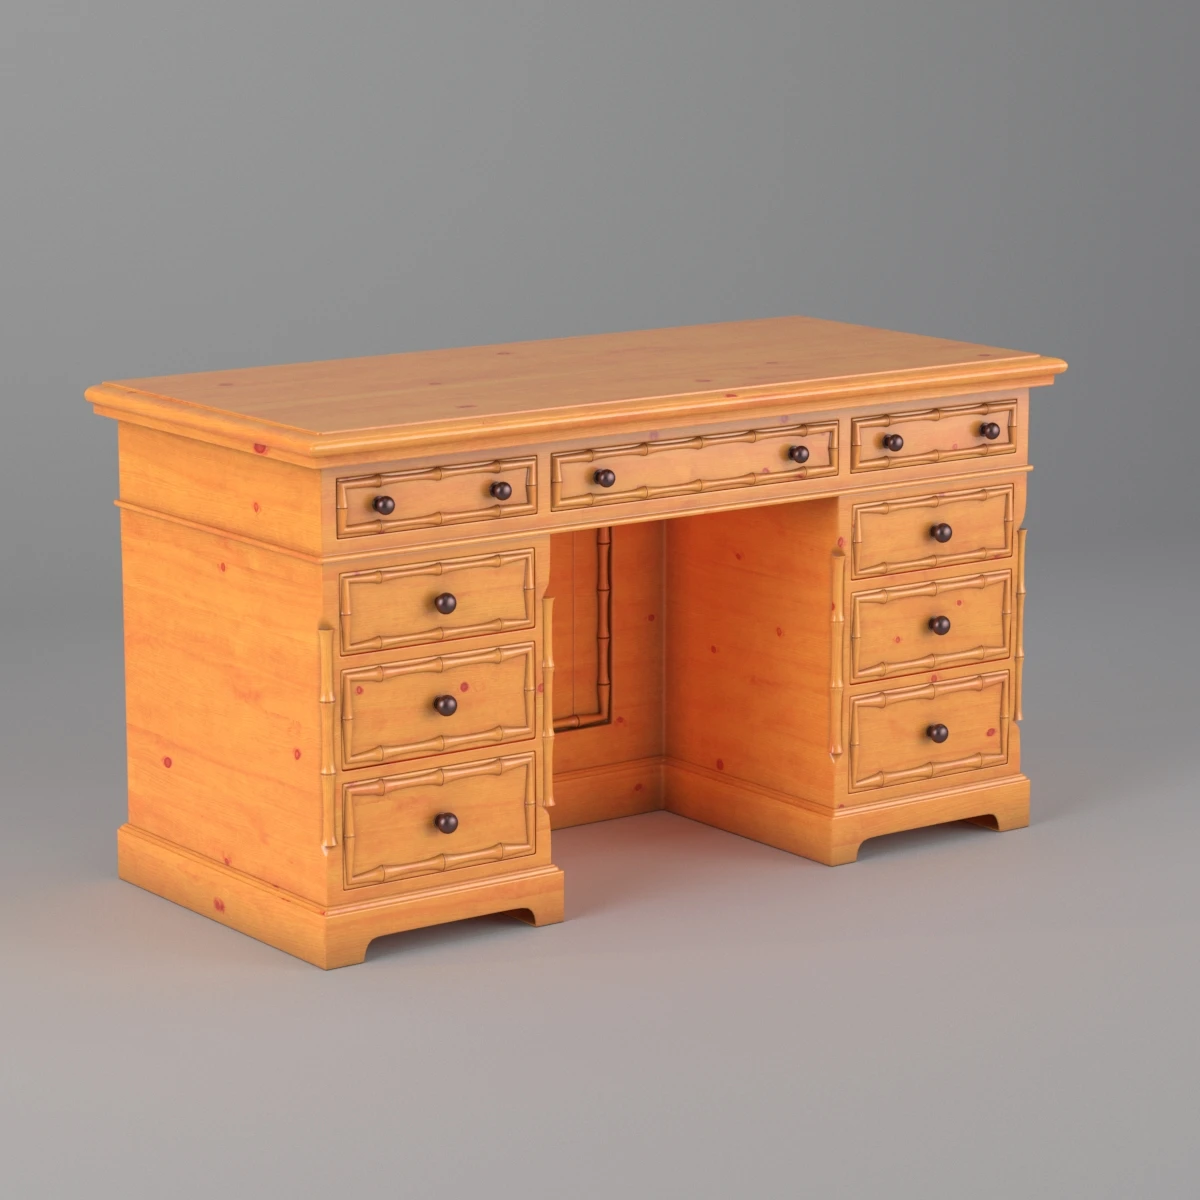 1920s Pine Faux Bamboo Painted Knee Hole Desk 3D Model_01